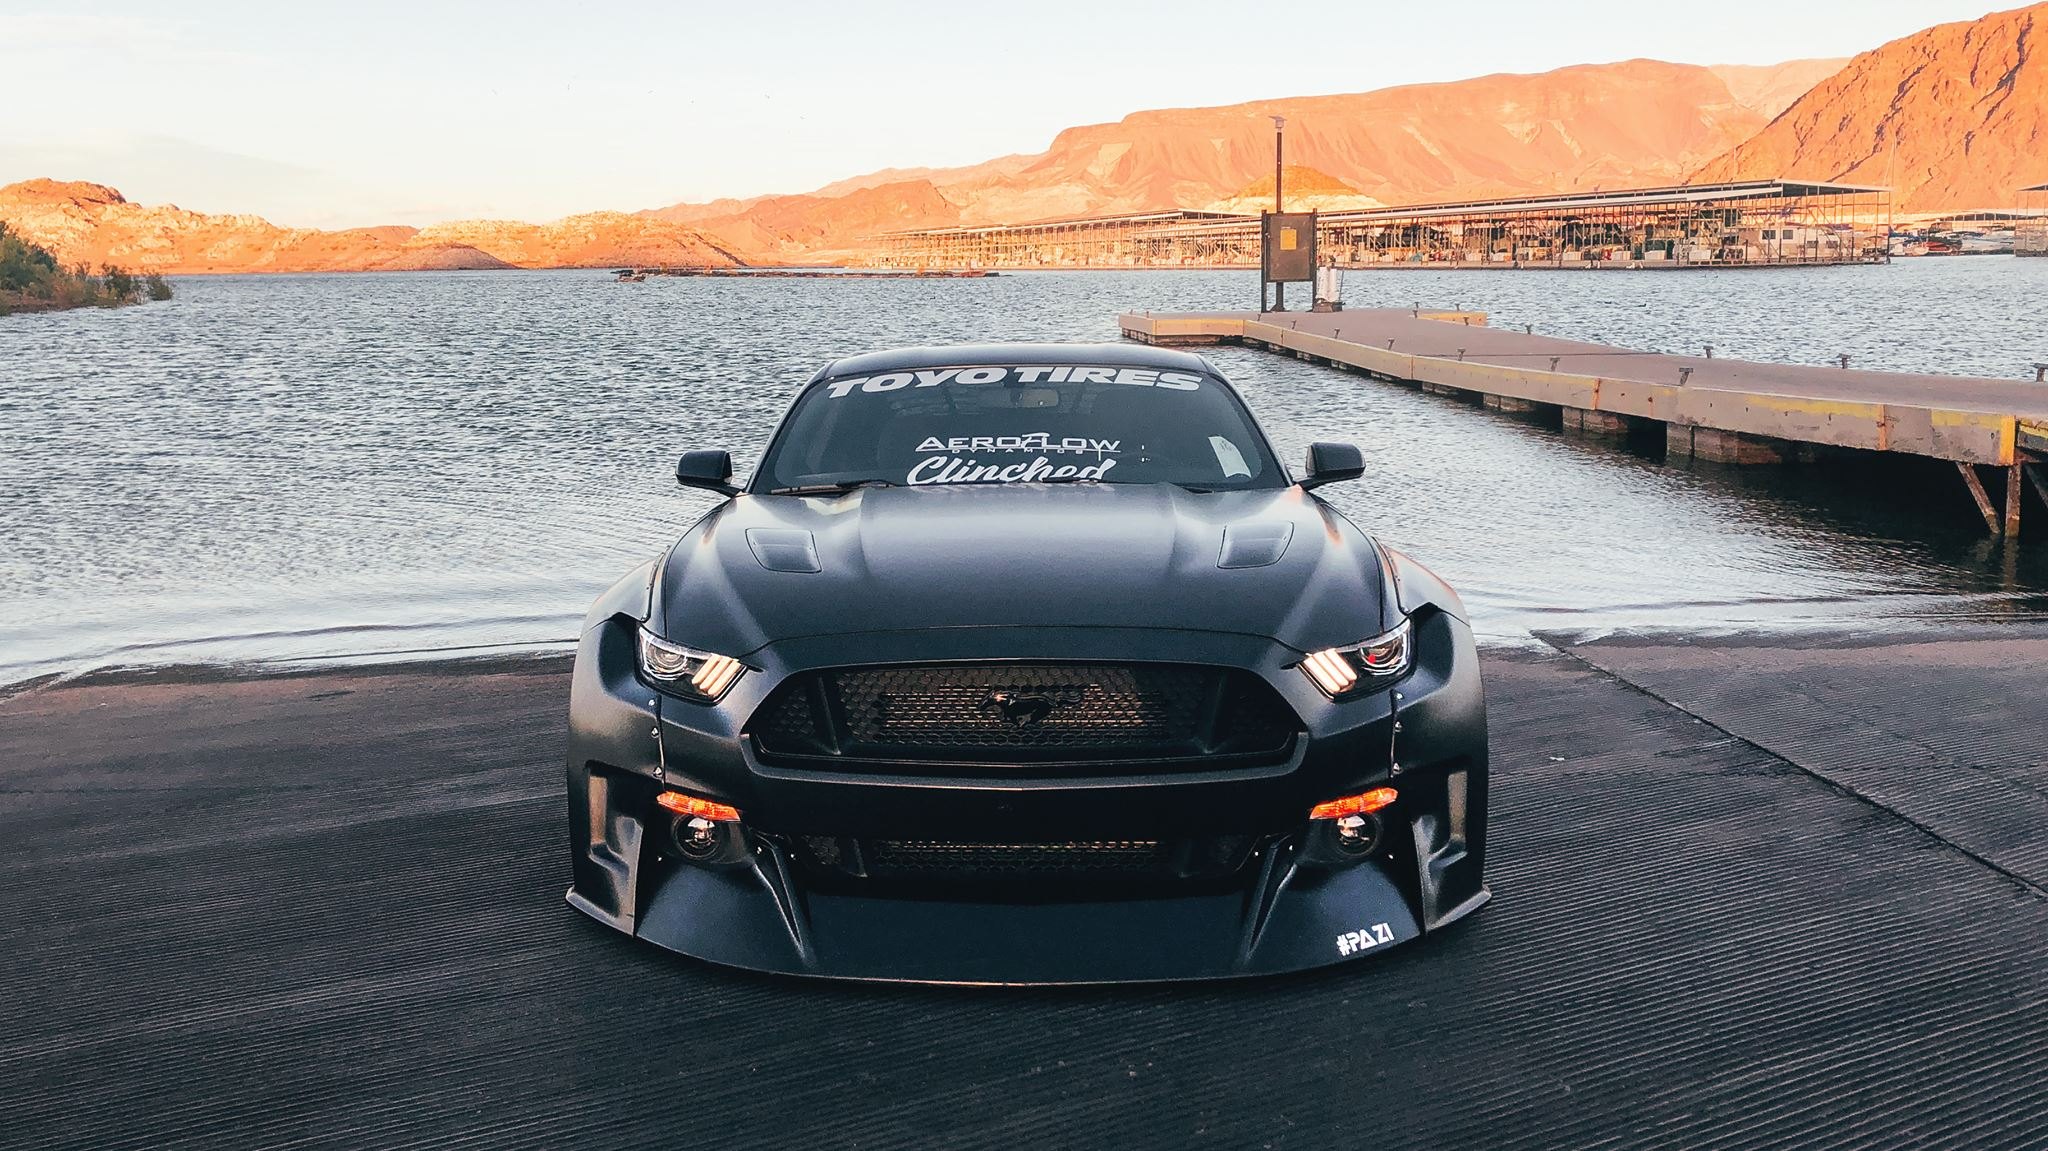 Aftermarket Headlights on Black Ford Mustang GT - Photo by Clinched